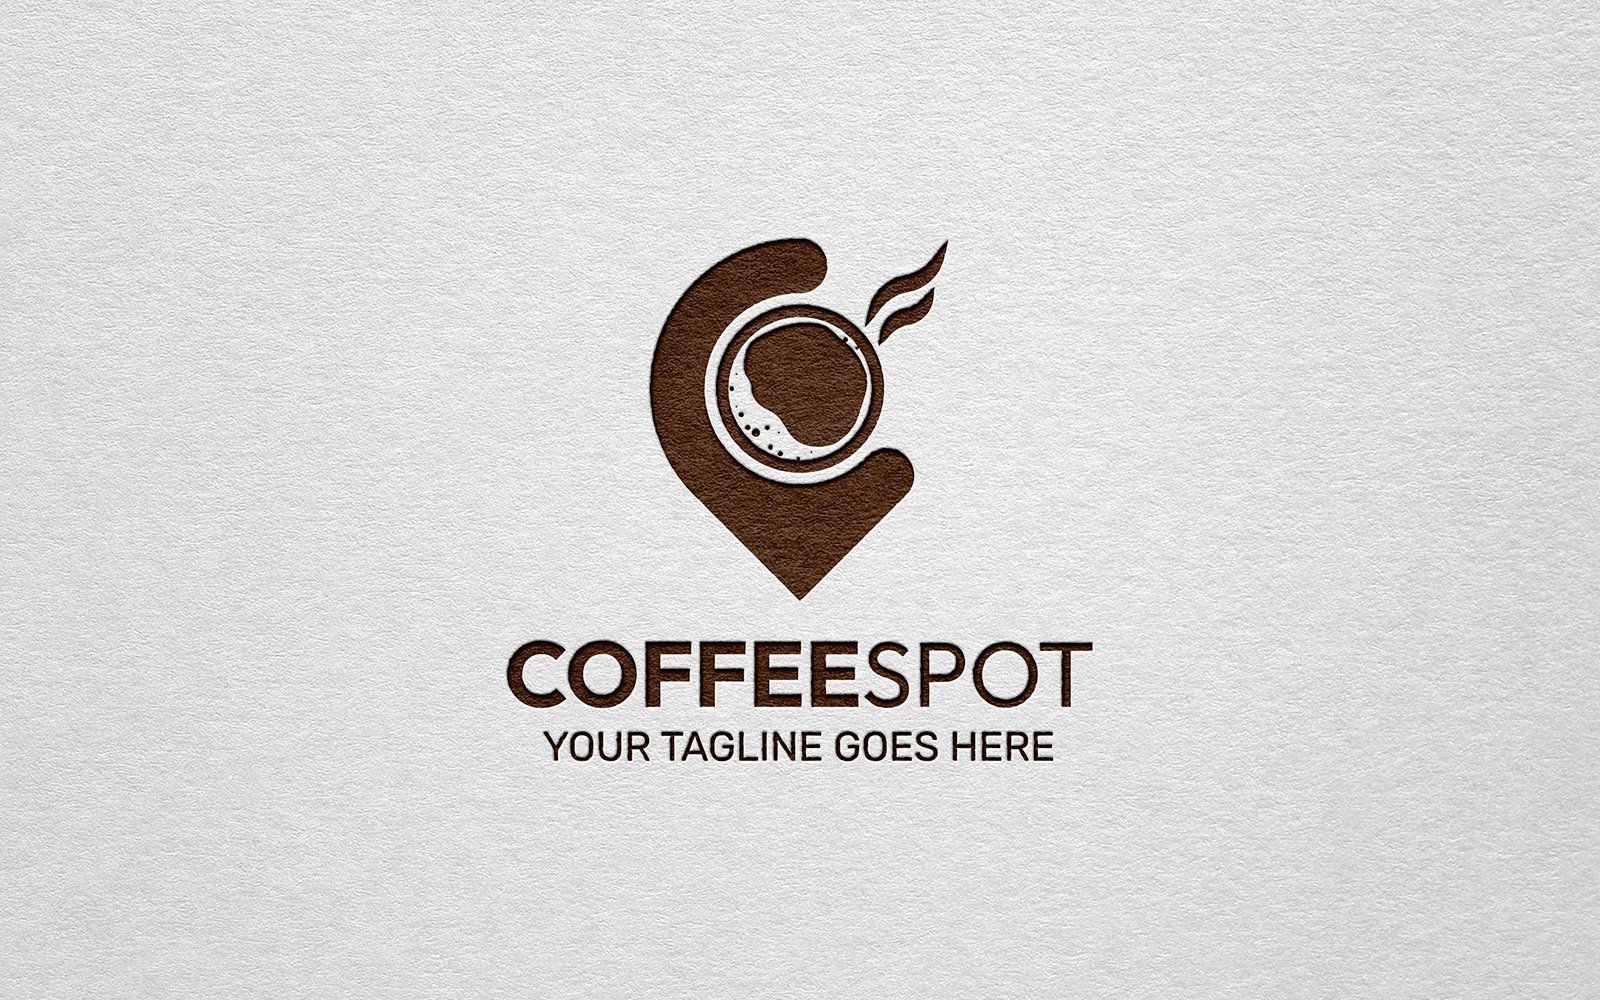 Template #299991 Coffee Cup Webdesign Template - Logo template Preview